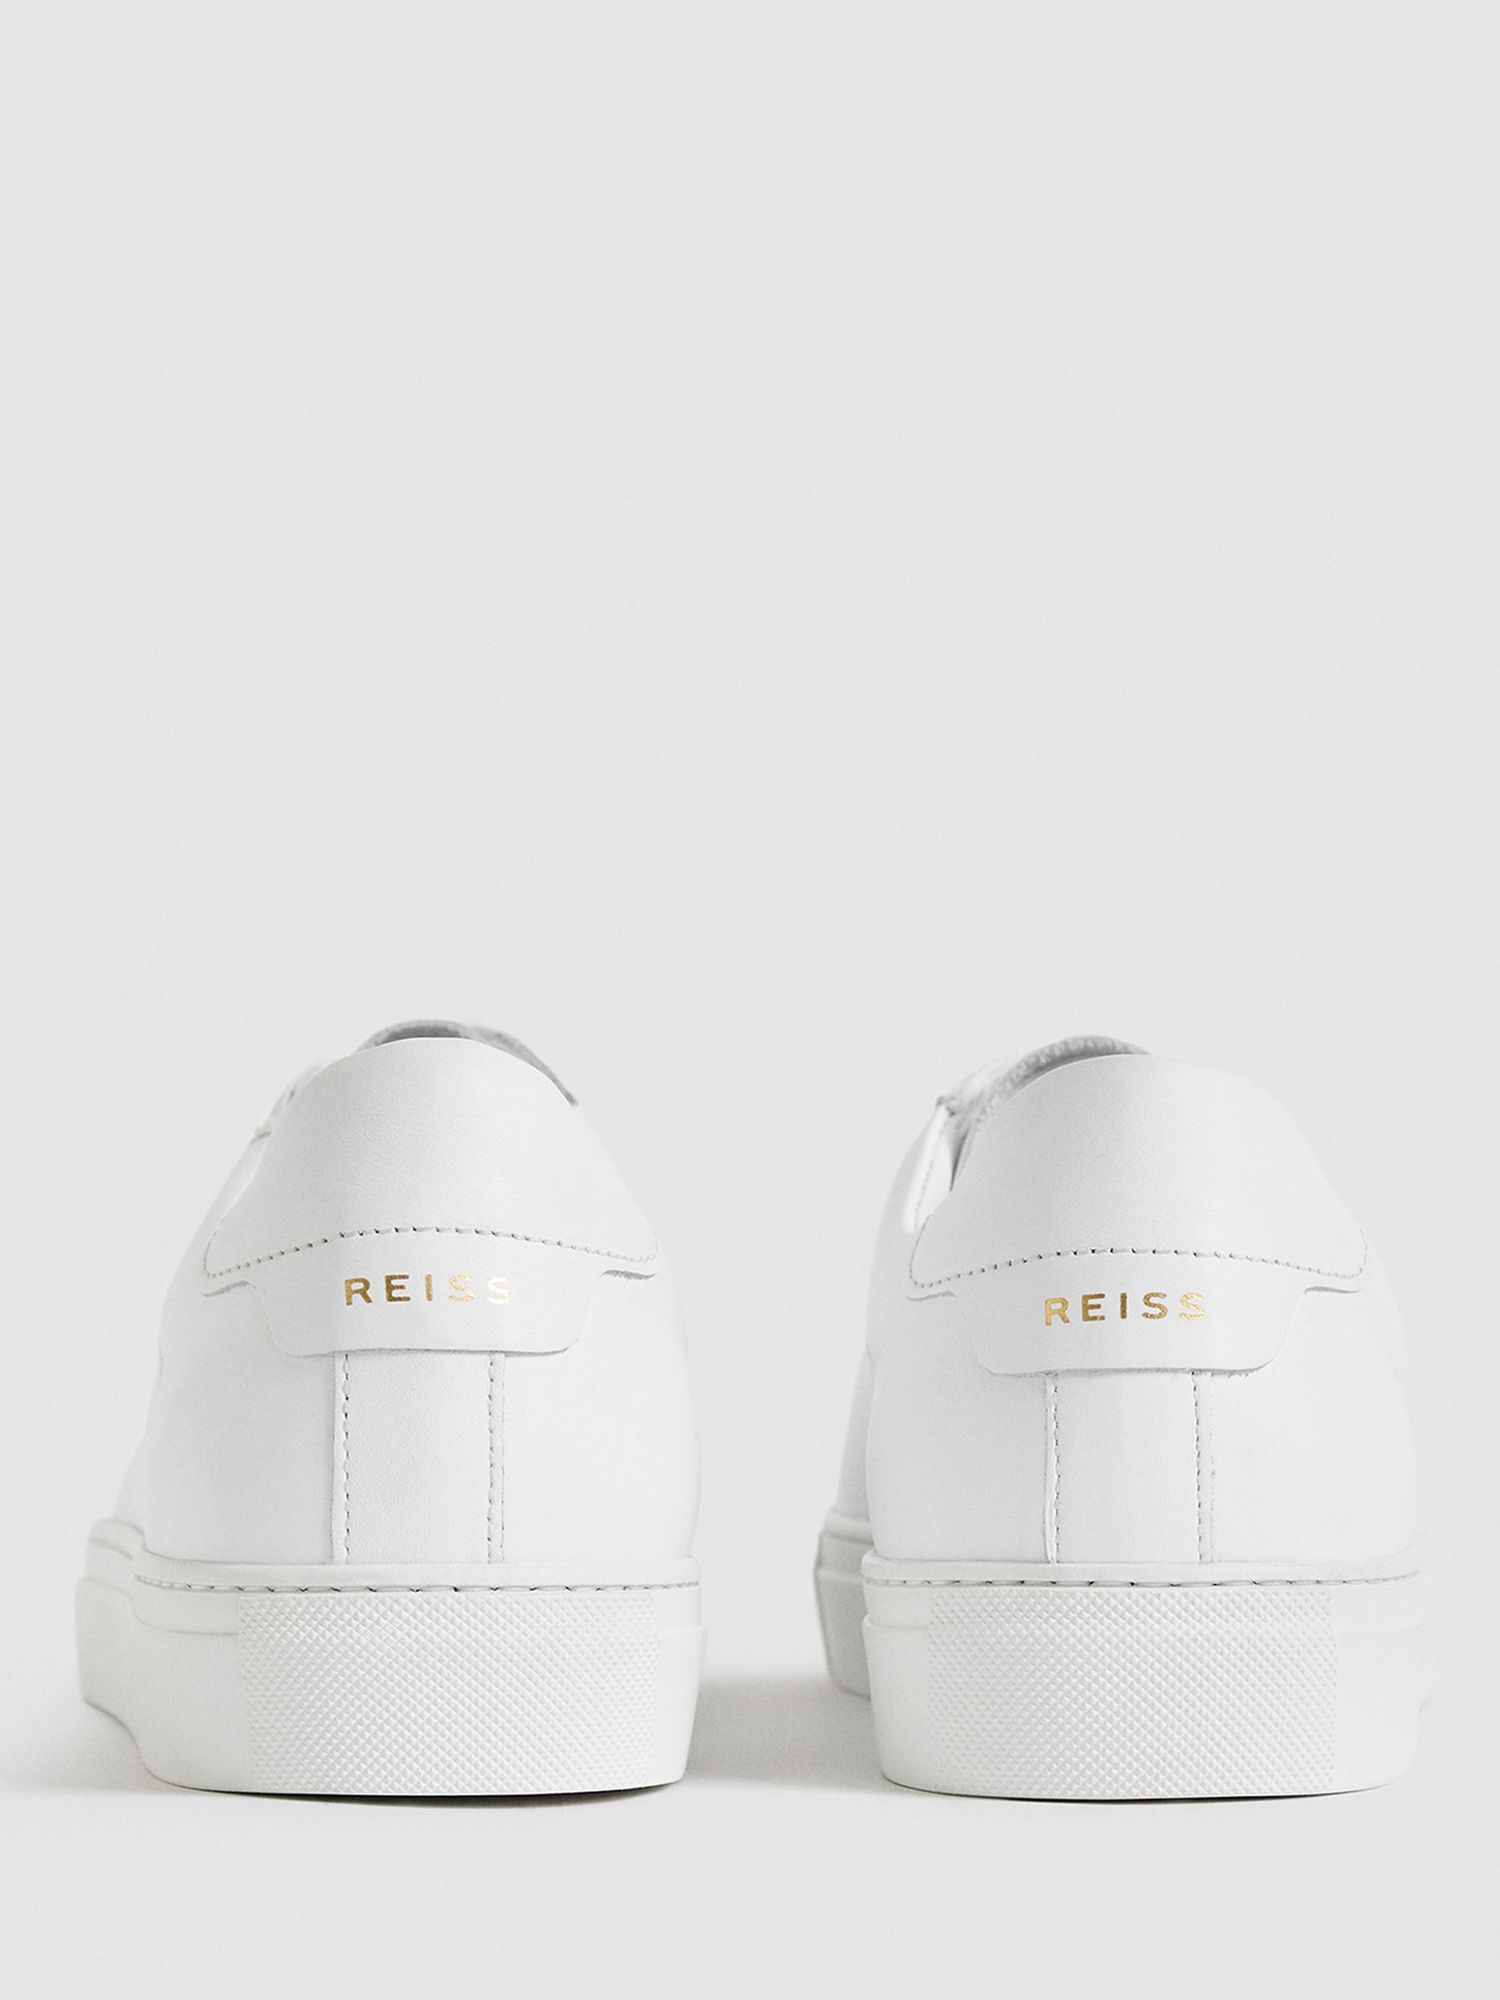 Buy Reiss Finley Leather Trainers Online at johnlewis.com